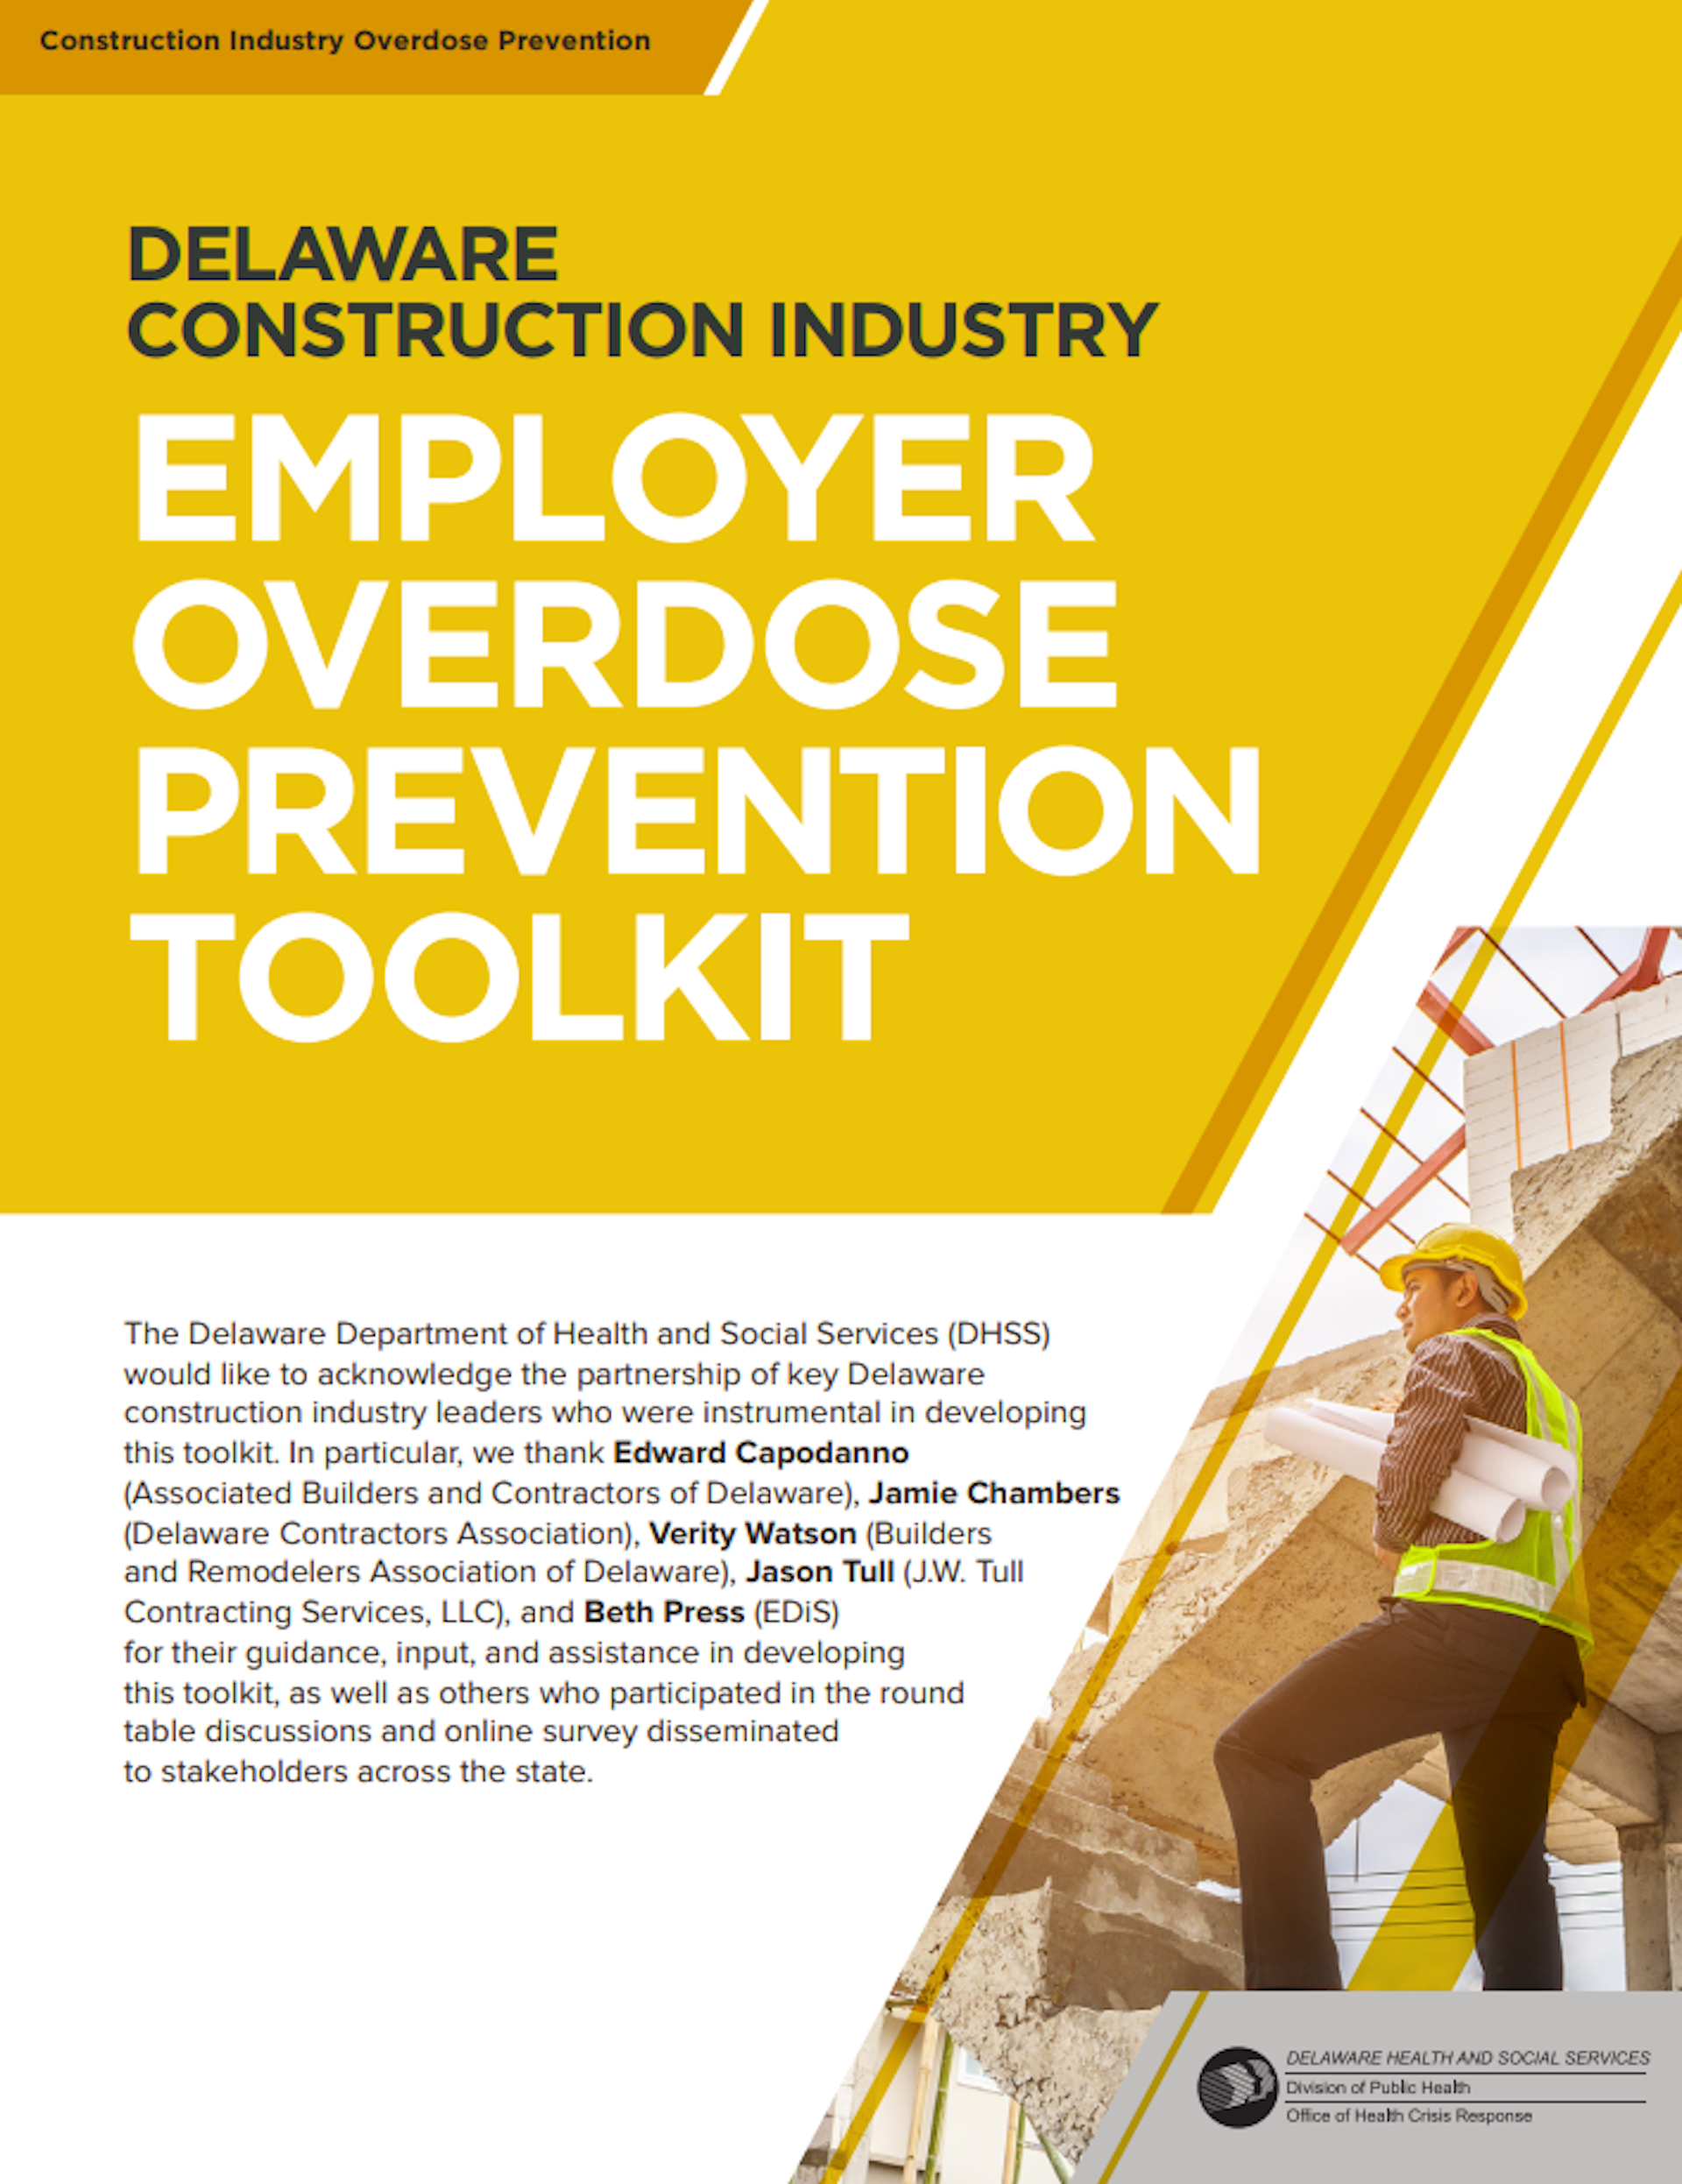 Download the Full 44-page Employer Overdose Construction Toolkit